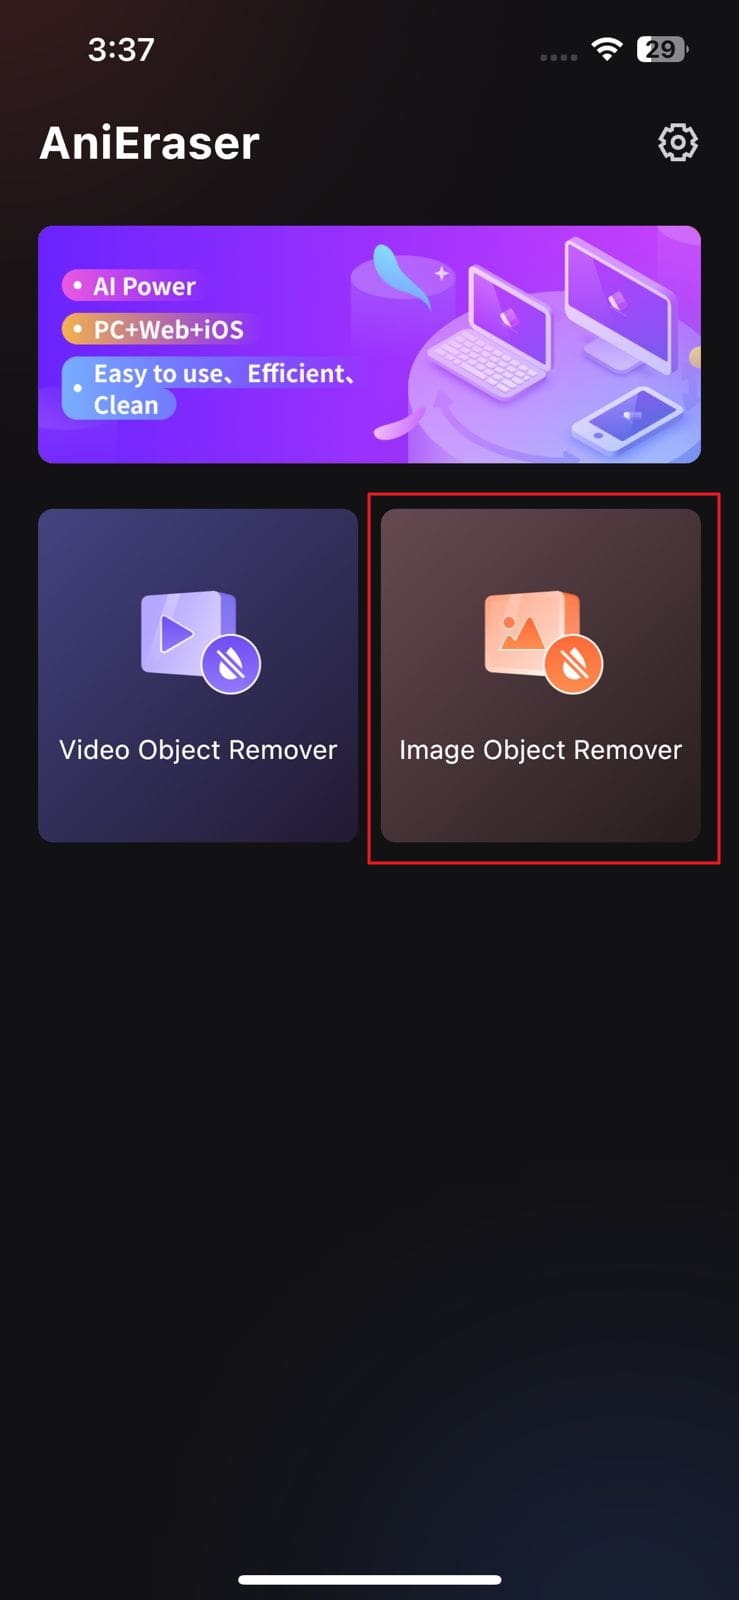 select image object remover